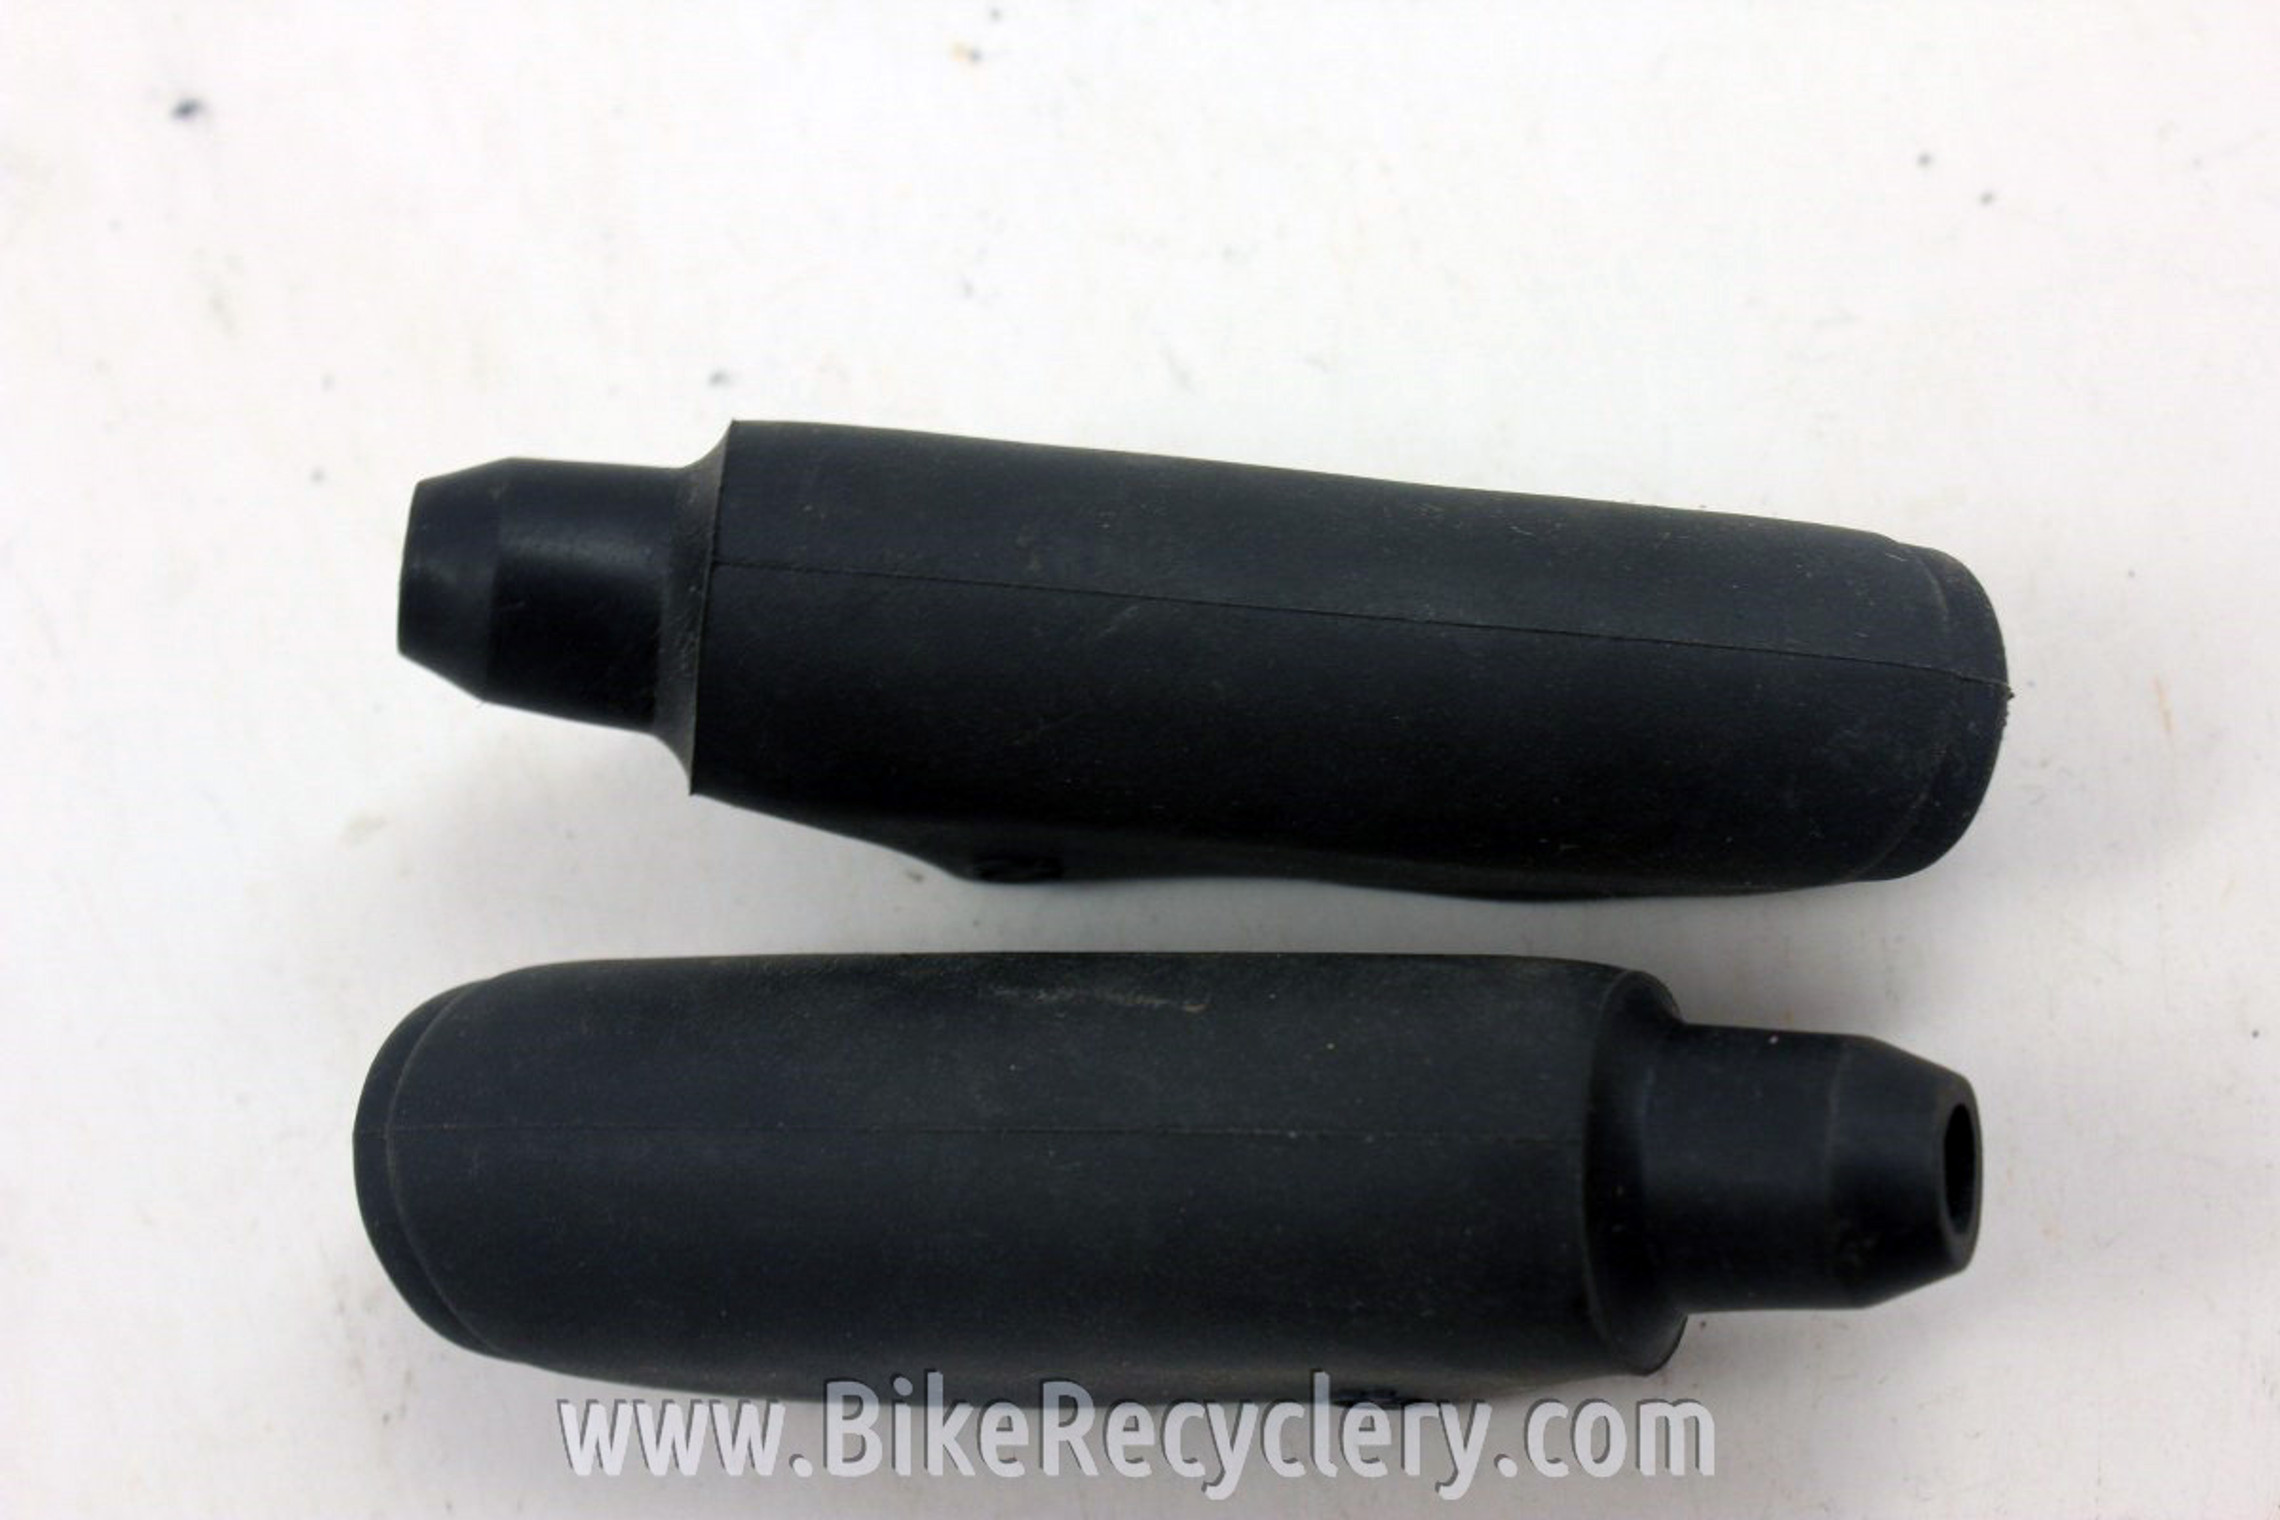 NOS Generic Brake Lever Rubber Dust Boots / Hoods, Labeled "L" (pair)